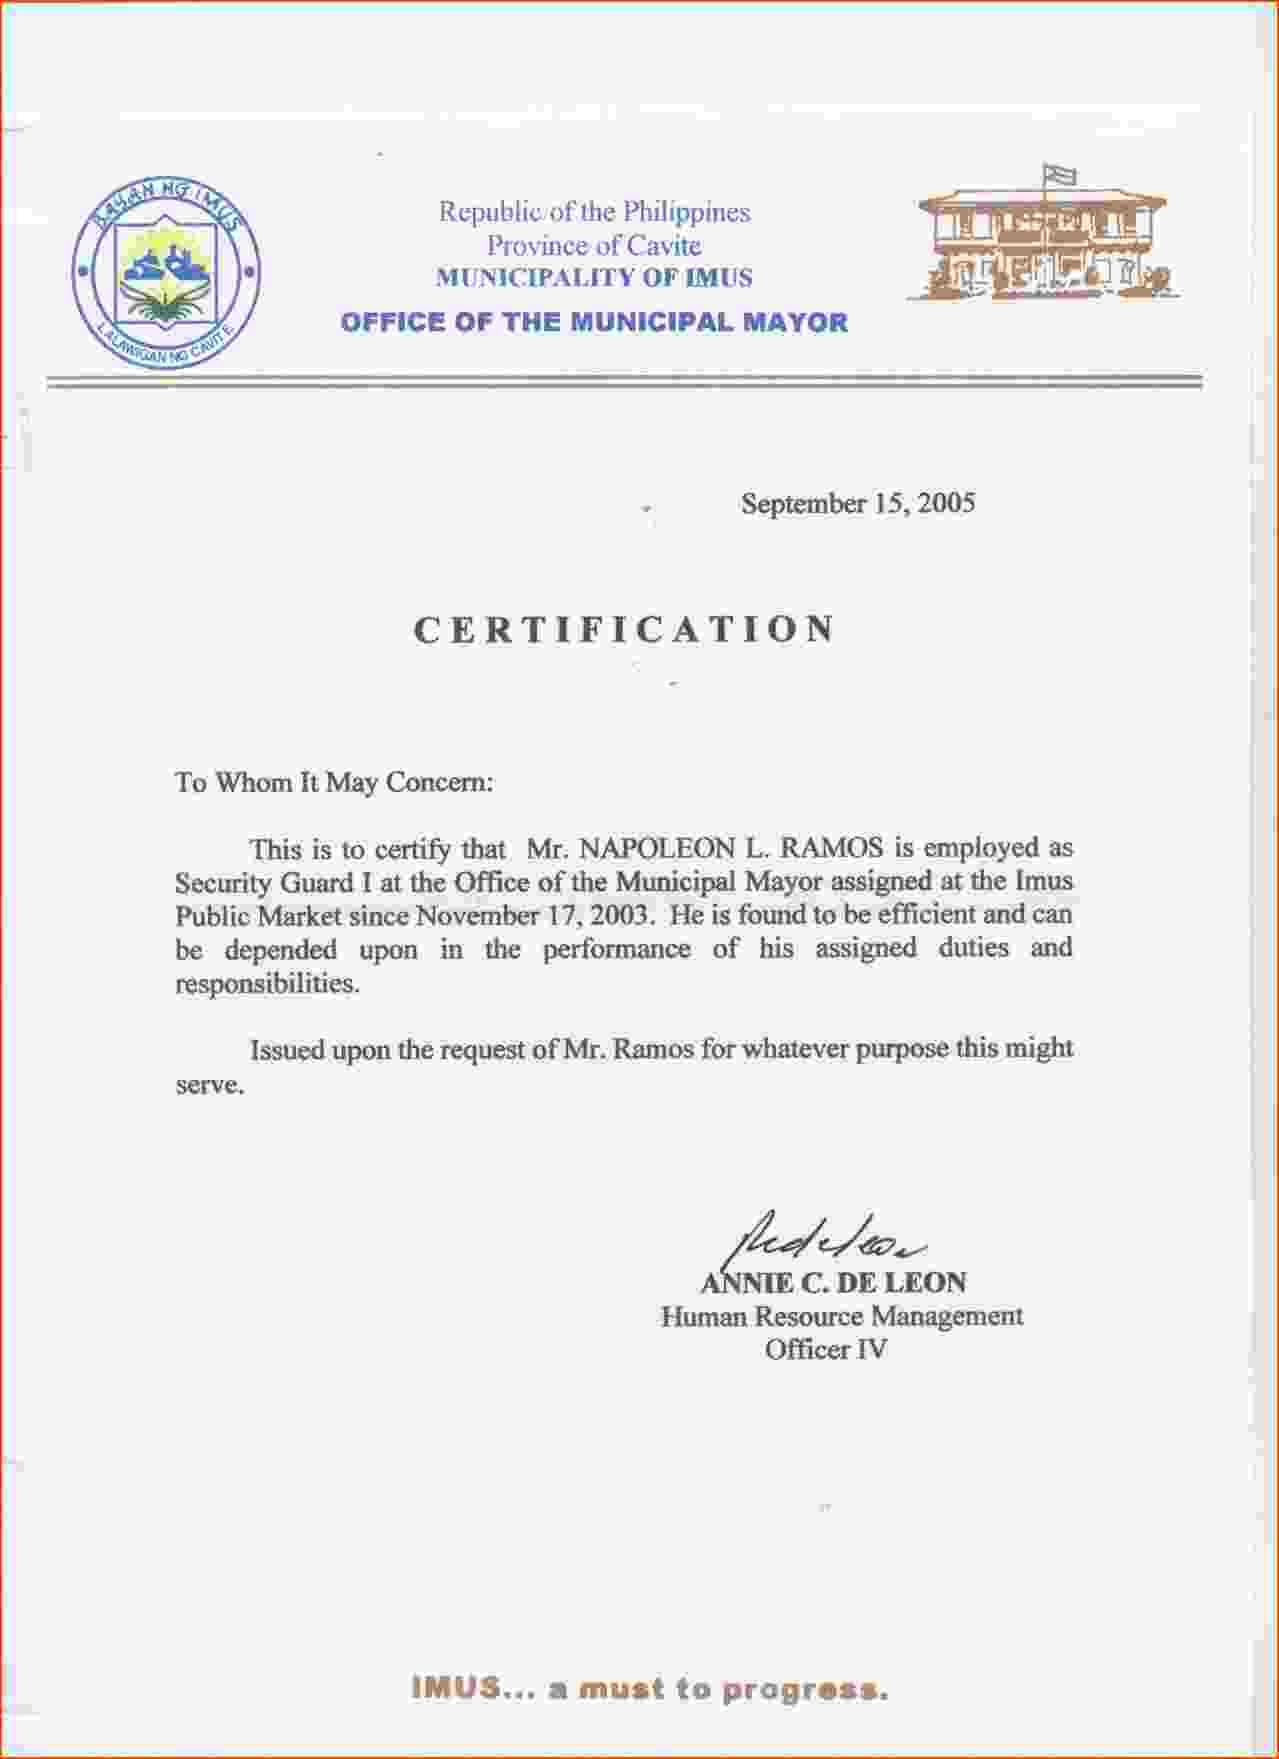 Sample Certificate Of Employment Certification Tugon Med For Certificate Of Employment Template